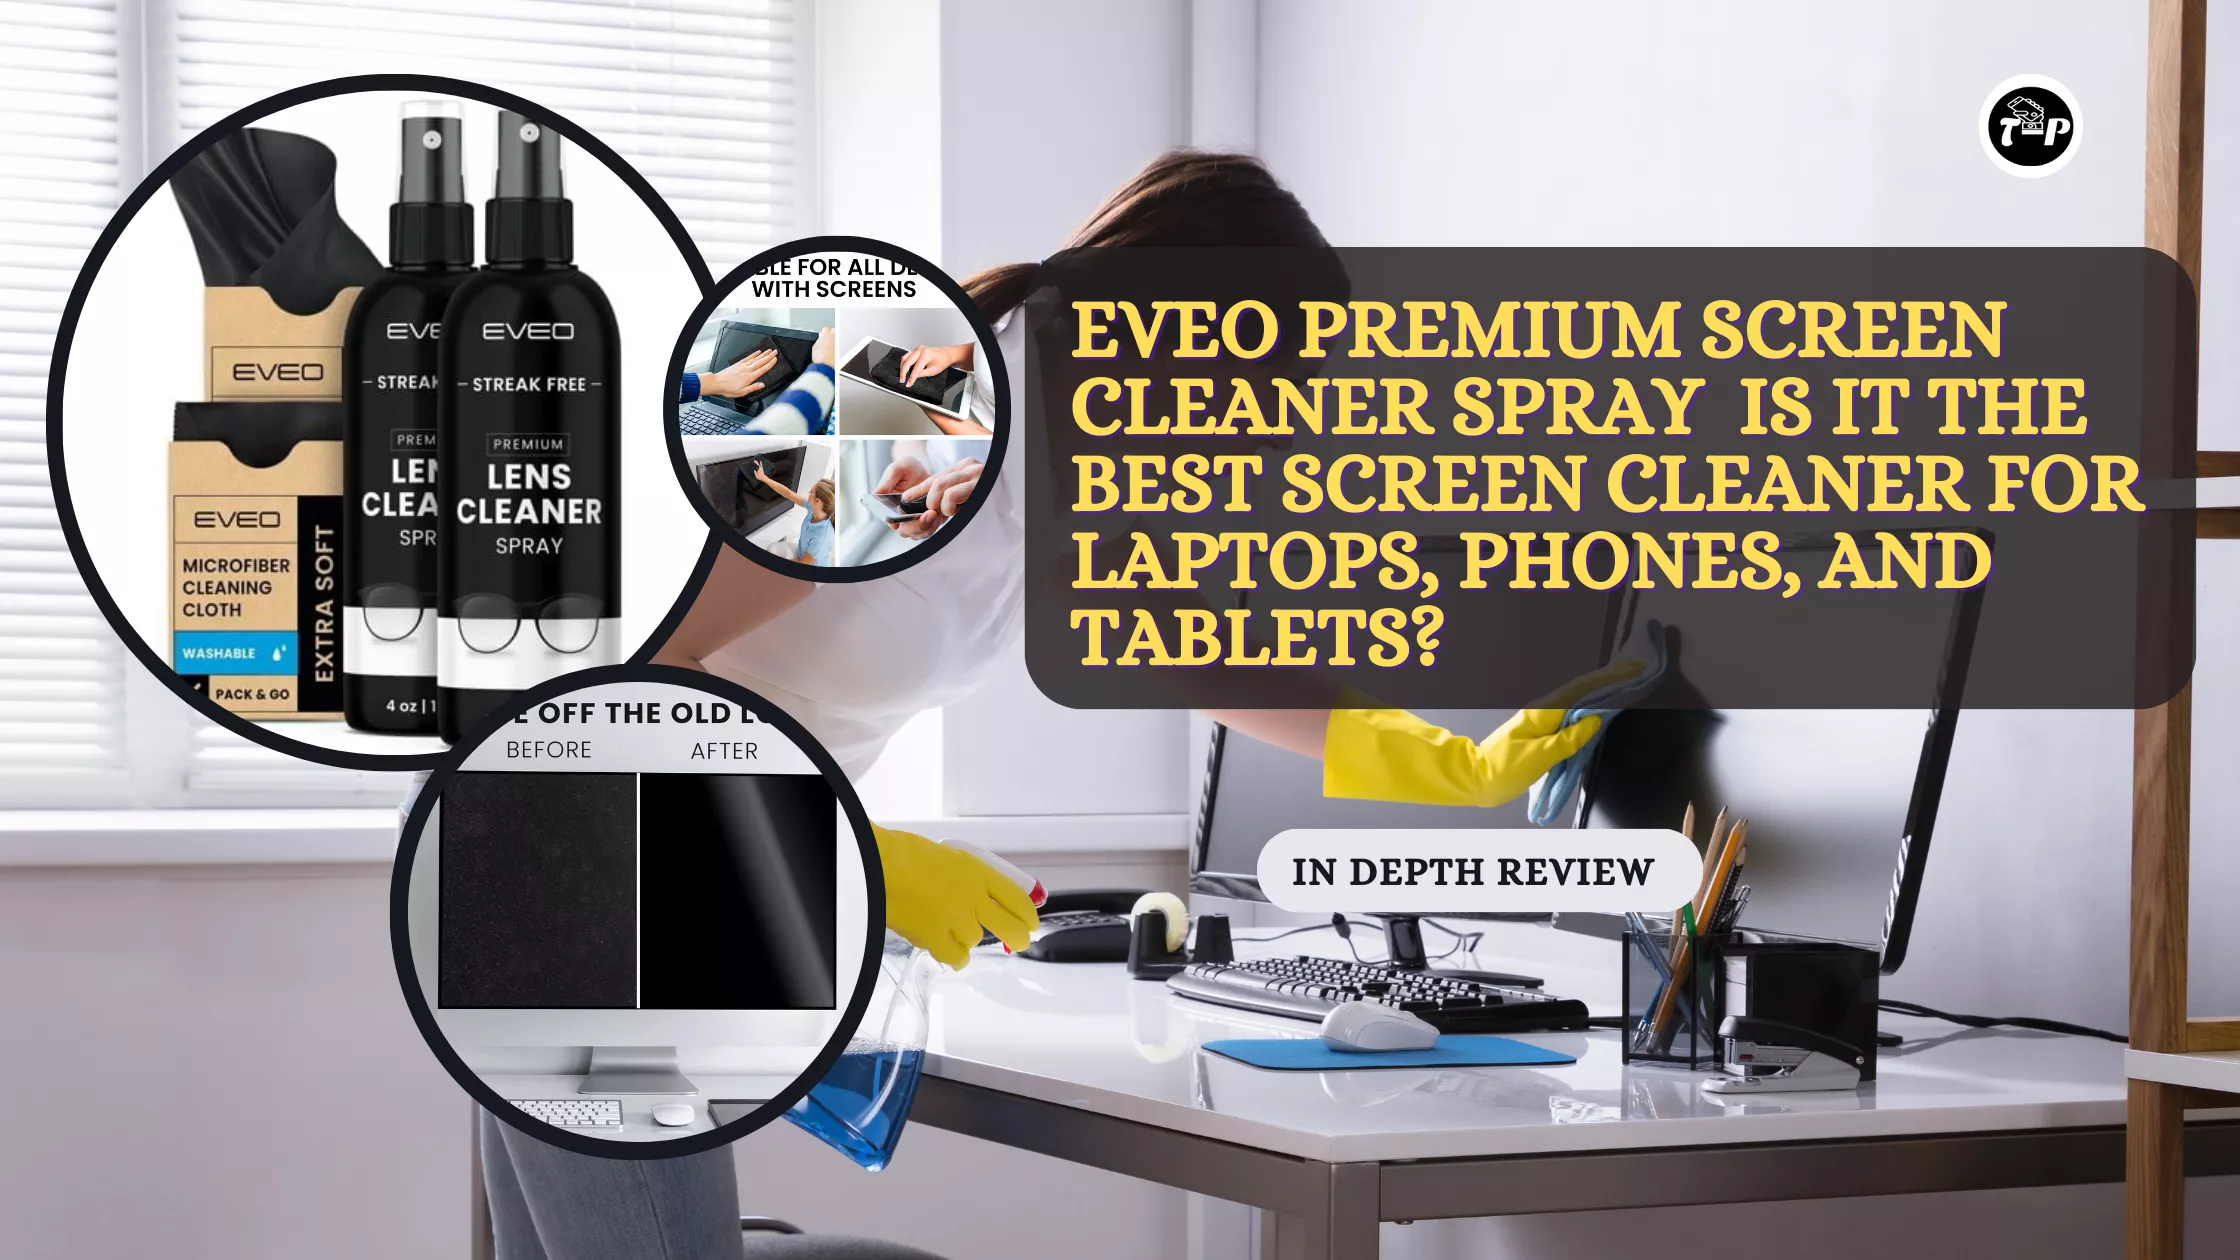 EVEO Premium Screen Cleaner Spray is the Best screen Screen Cleaner for laptops, phones, and tablets.